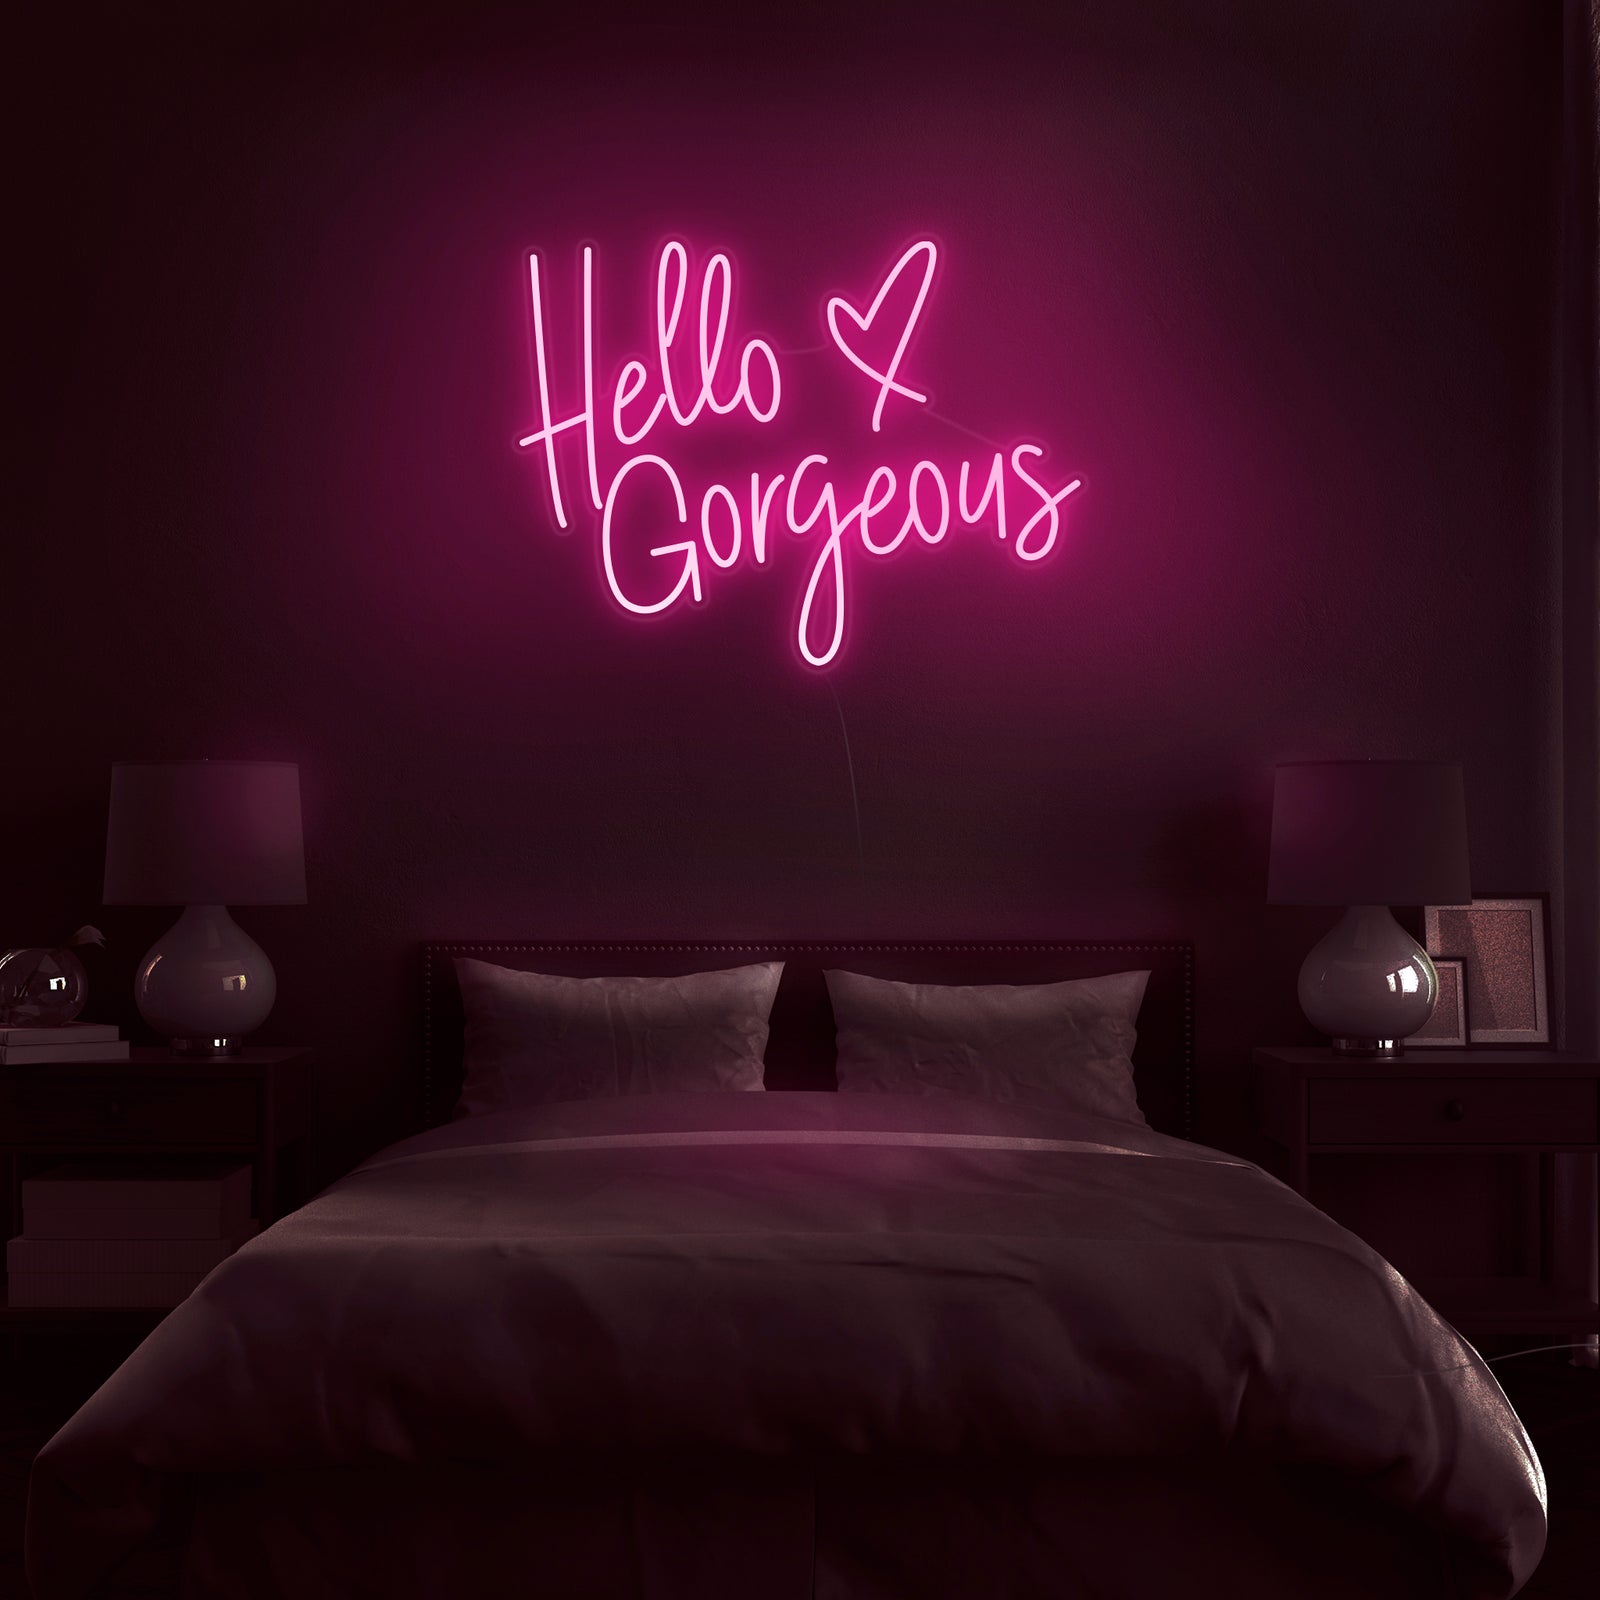 'Hello Gorgeous' Custom Made Neon Sign by Nuwave Neon